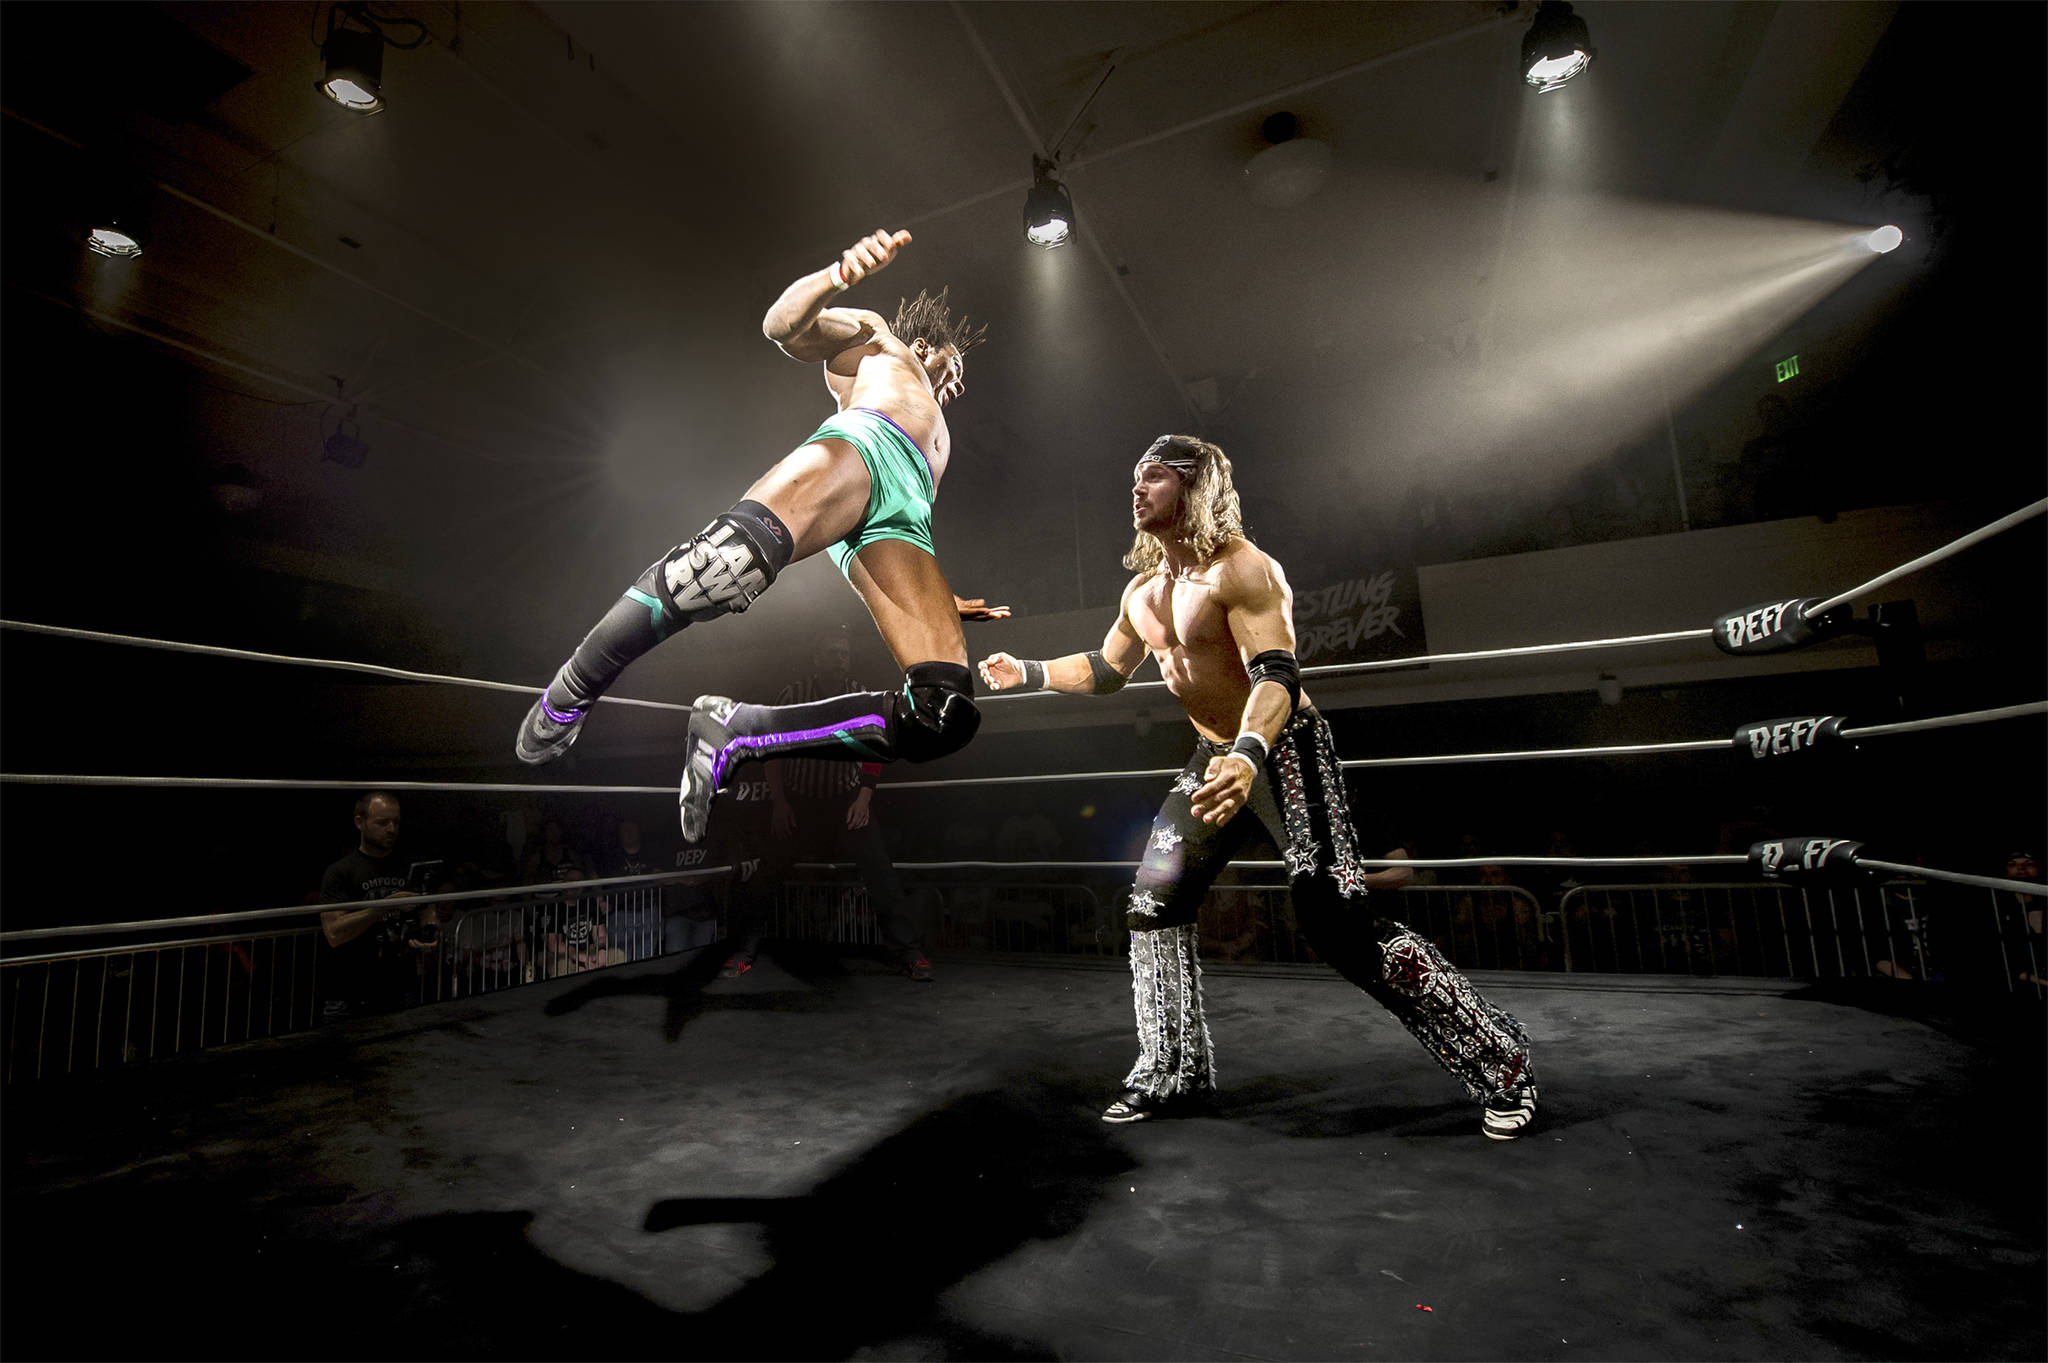 Shane “Swerve” Strickland flies at John Morrison during DEFY 3: Swerve City at Washington Hall. Strickland would go on to defeat Morrison. Photography by Nate Watters